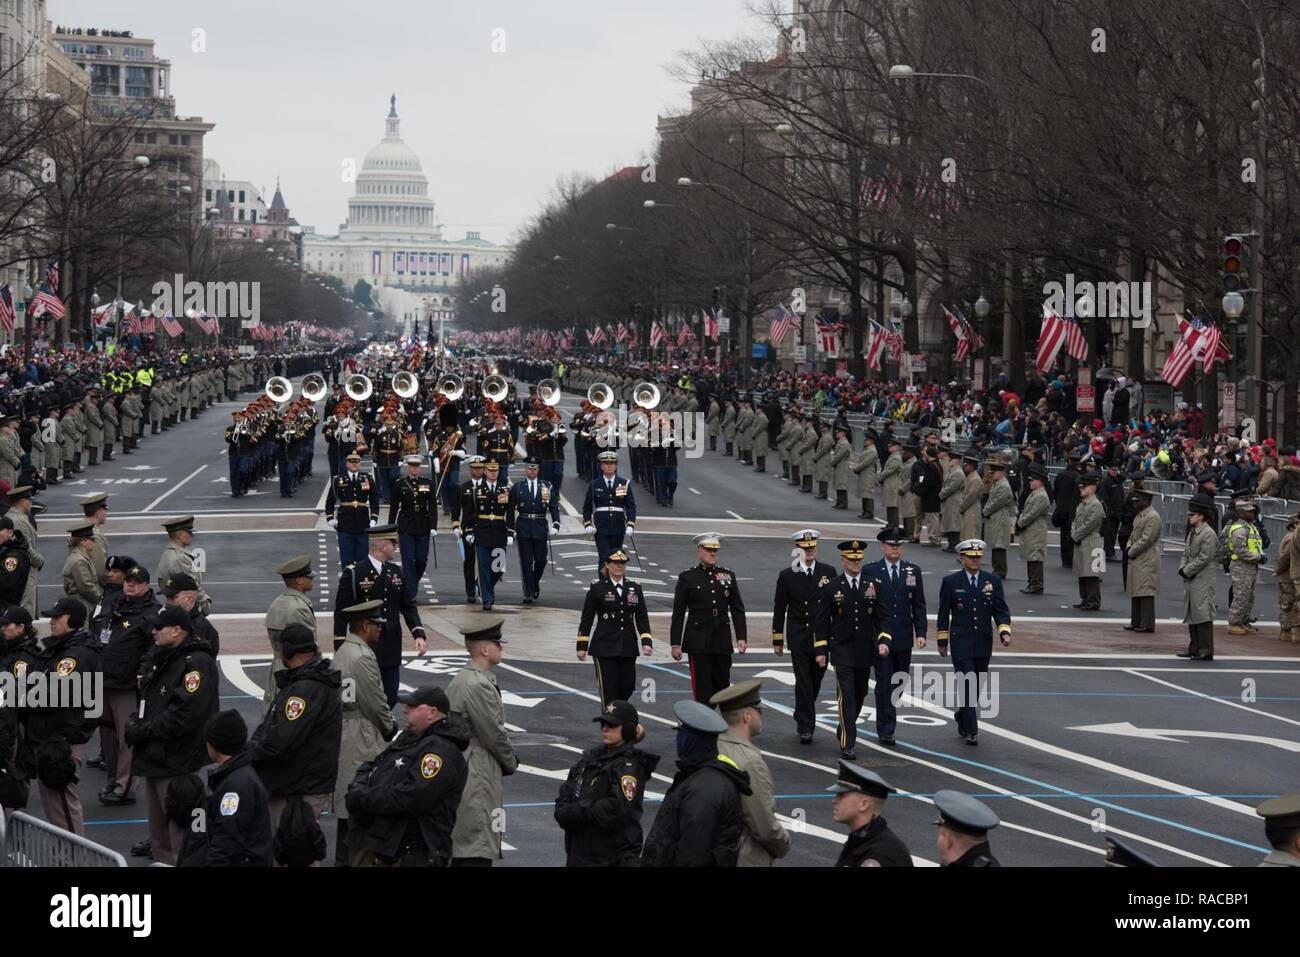 U.S. Servicemembers march down Pennsylvania Avenue during the Presidential Inaugural Parade in Washington D.C., January 20, 2017. The Parade was held to celebrate the inauguration of President Donald Trump. Stock Photo